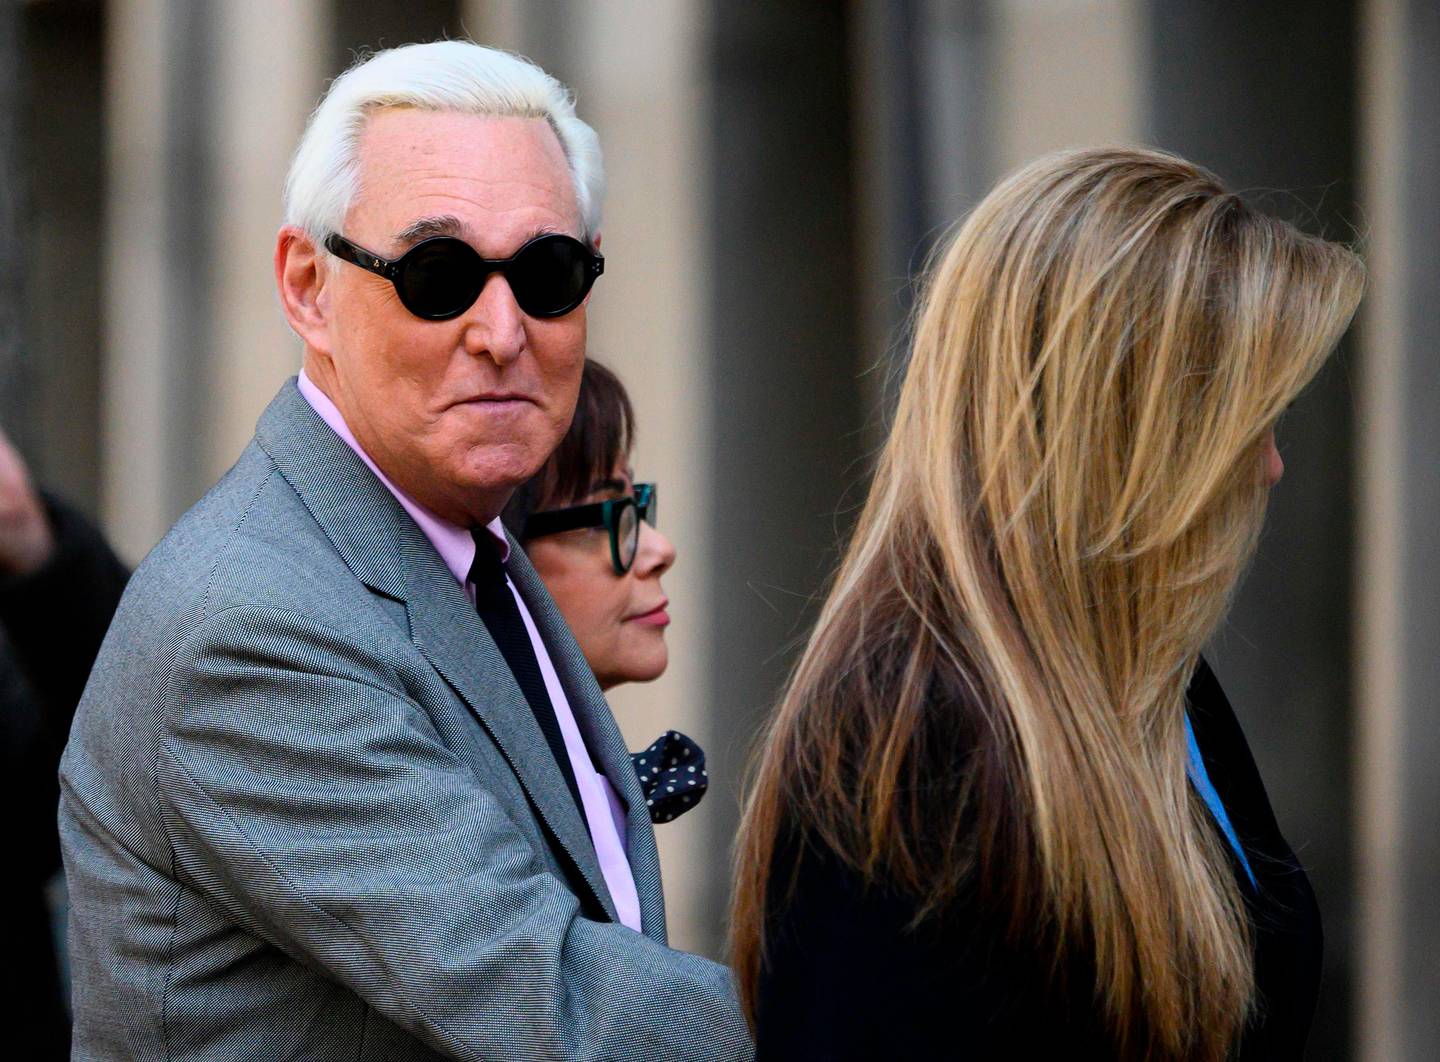 (FILES) In this file photo taken on November 5, 2019 Roger Stone, former adviser to US President Donald Trump, enters the E. Barrett Prettyman United States Court House with his wife Nydia (C) and daughter Adria Stone(R) in Washington, DC. - Republican political consultant Roger Stone requested a new trial February 14, 2020, just days after President Donald Trump's criticism of his proposed jail sentence sparked an uproar over political influence in the justice system. (Photo by Andrew CABALLERO-REYNOLDS / AFP)